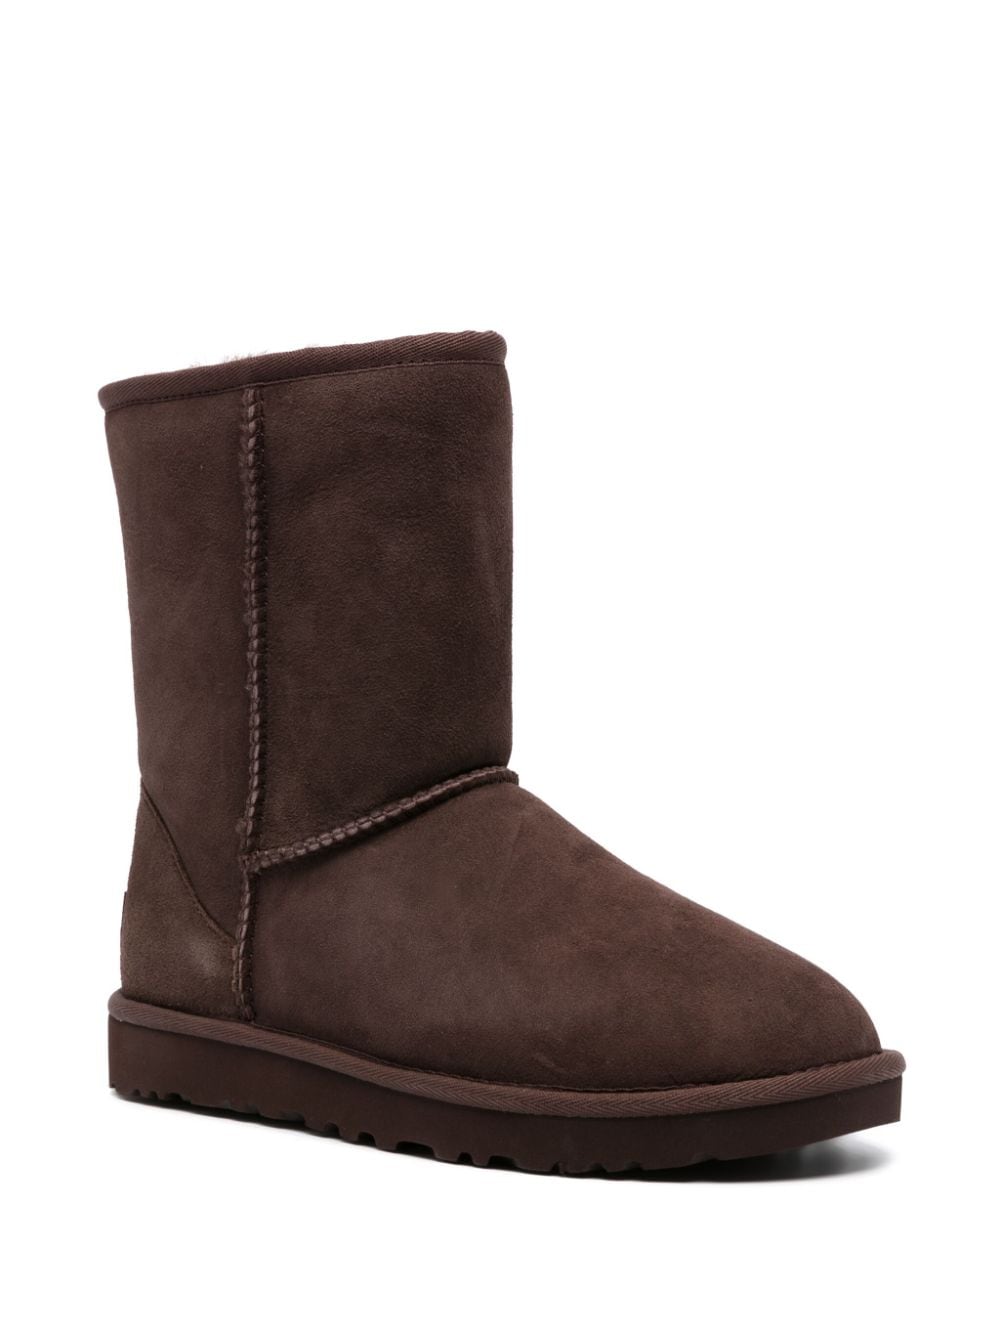 Shop Ugg Classic Short Ii Suede Boots In Braun